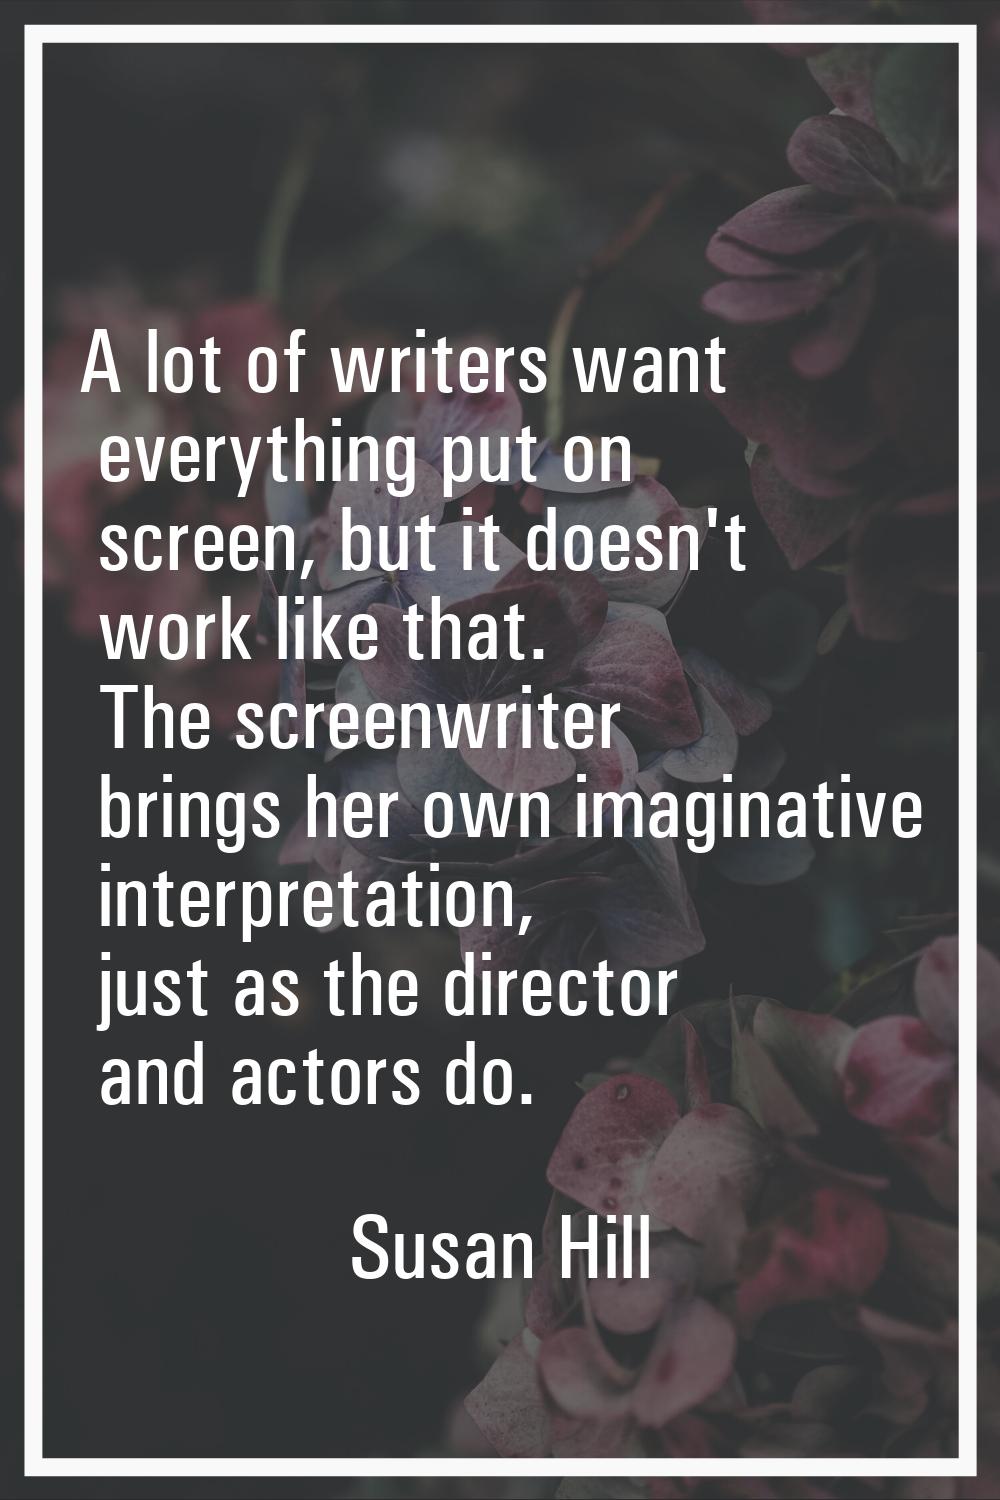 A lot of writers want everything put on screen, but it doesn't work like that. The screenwriter bri